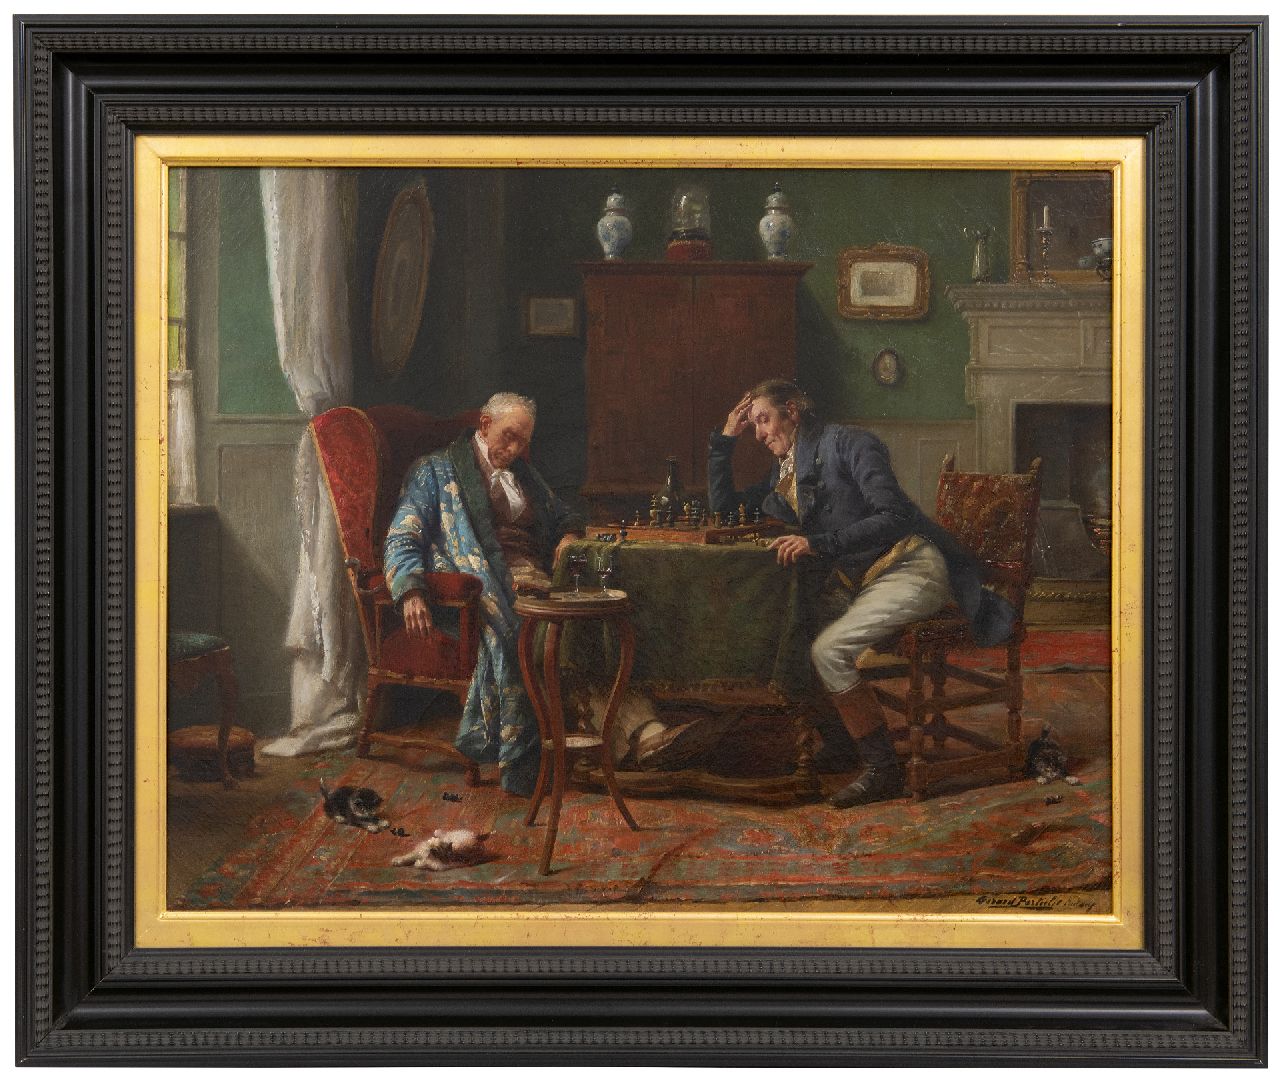 Portielje G.J.  | 'Gerard' Joseph Portielje | Paintings offered for sale | The chess game, oil on canvas 46.7 x 58.5 cm, signed l.r.